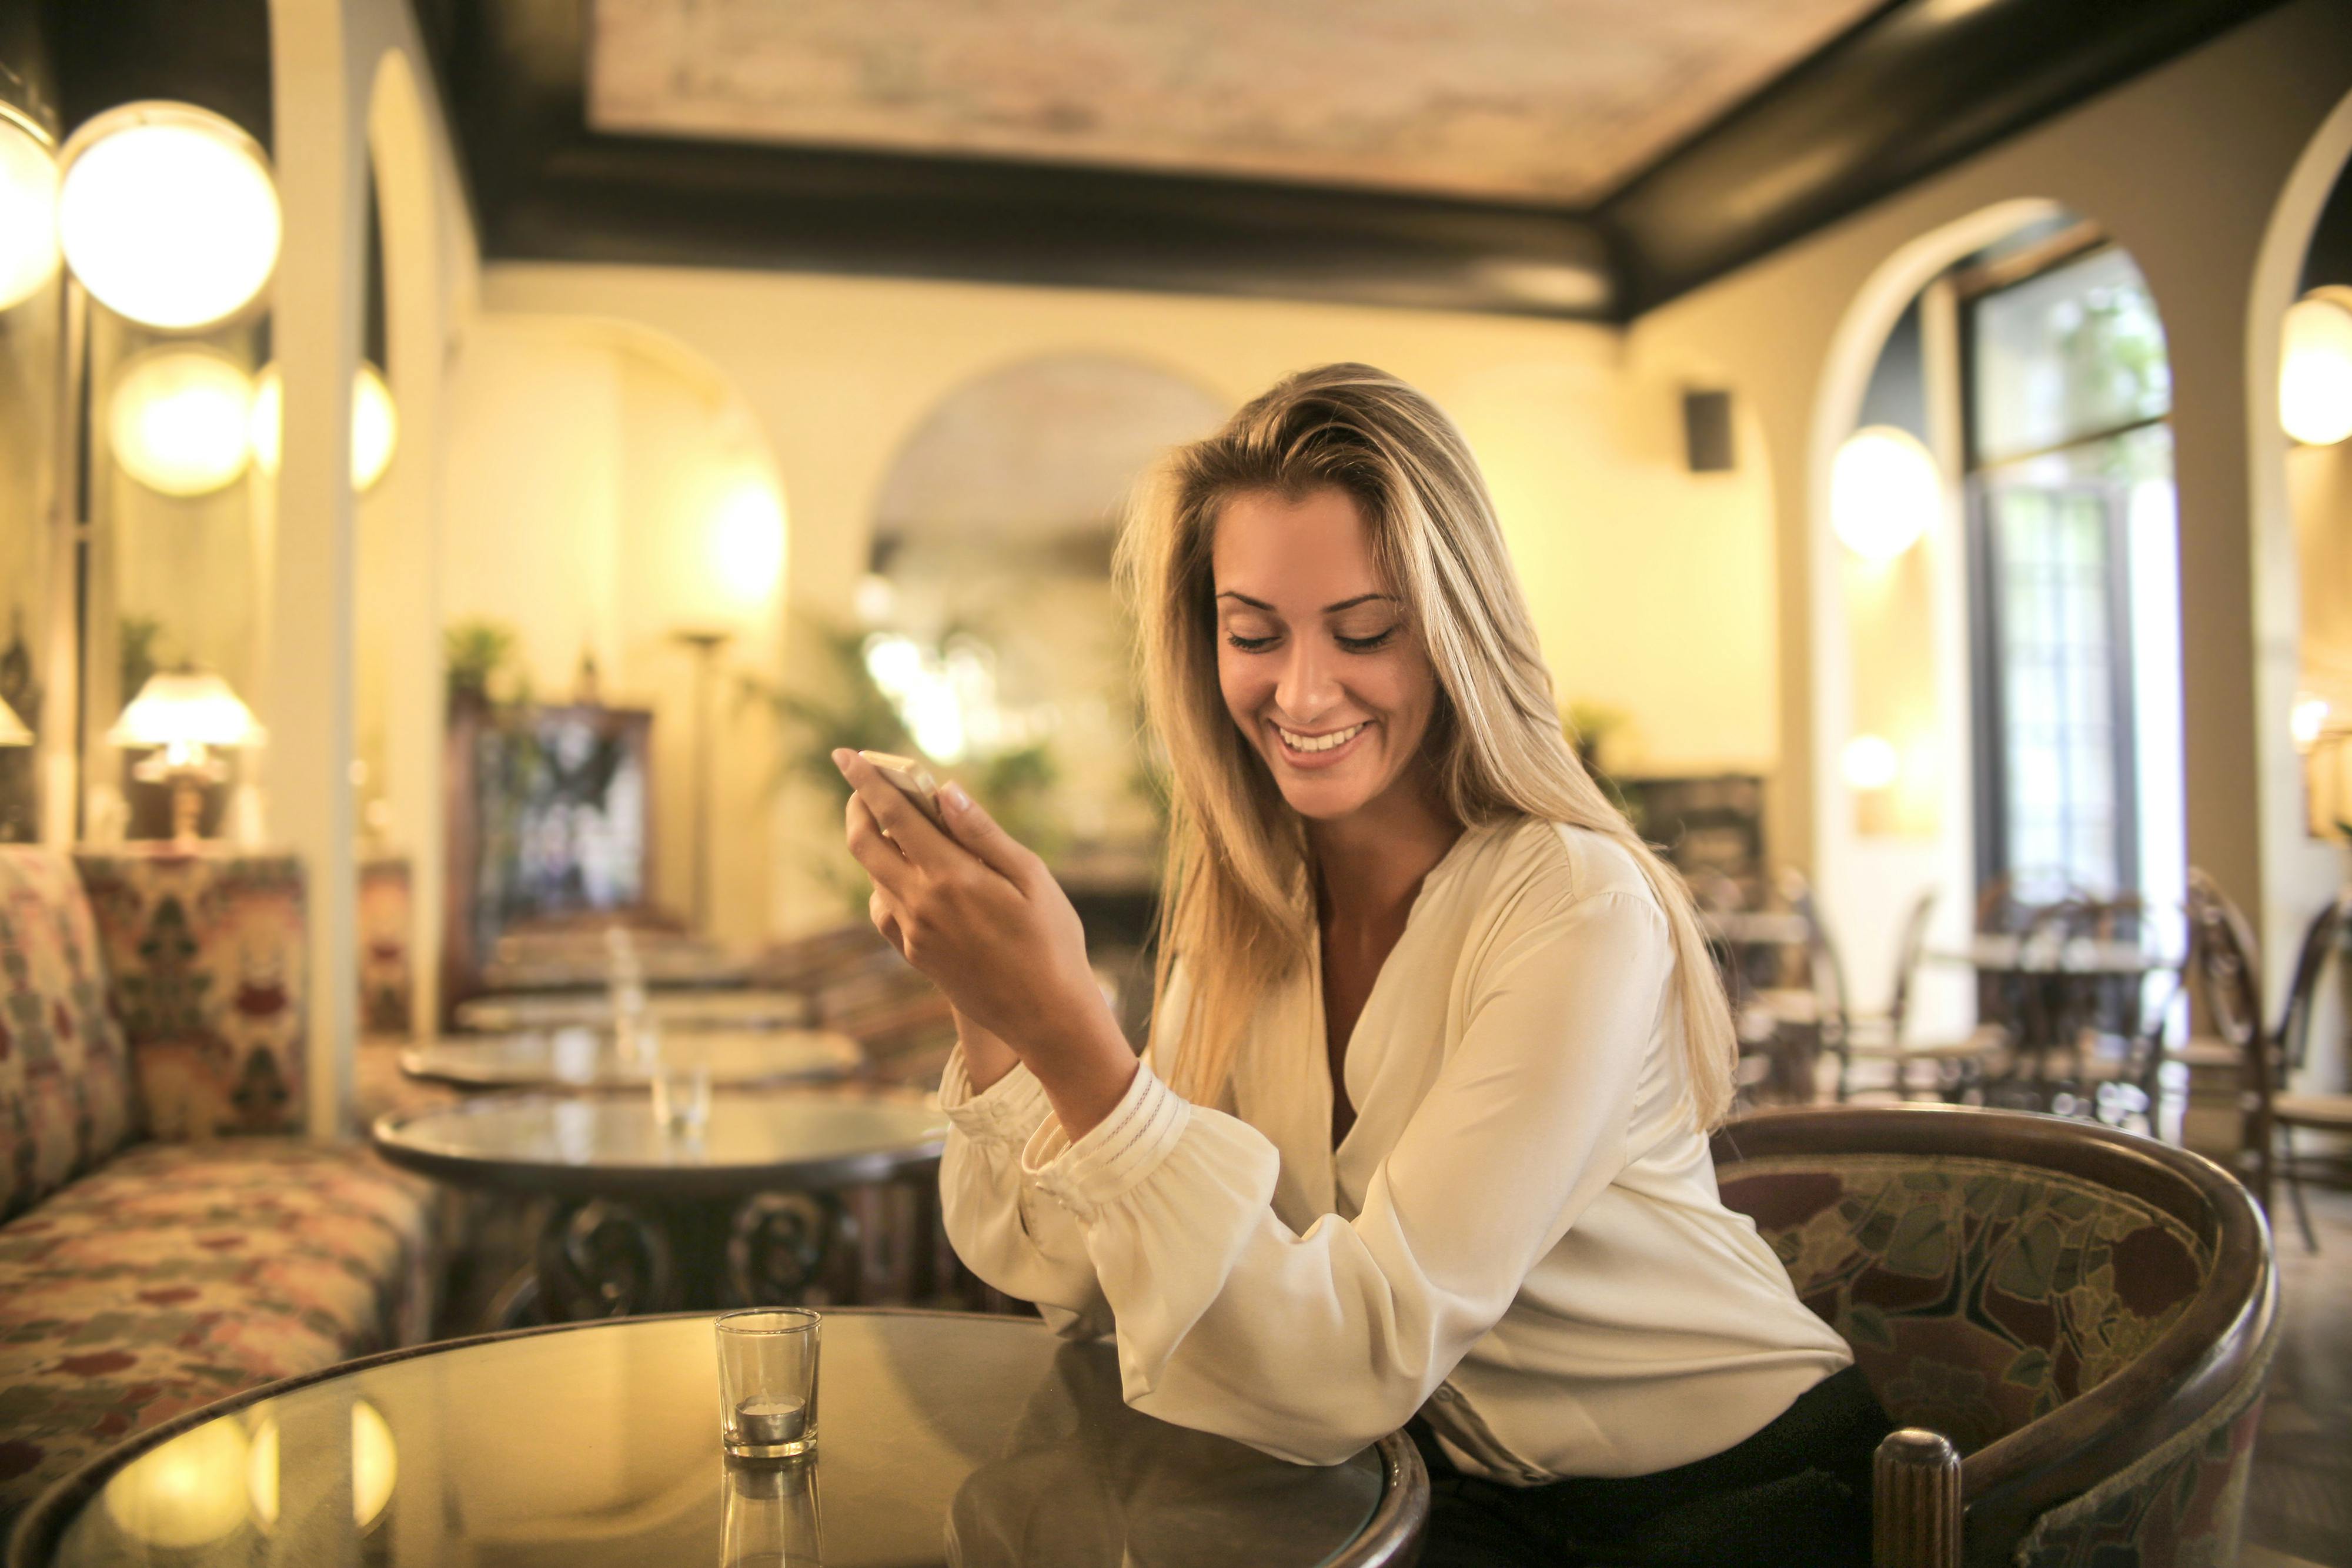 A woman texting while at a restaurant | Source: Pexels